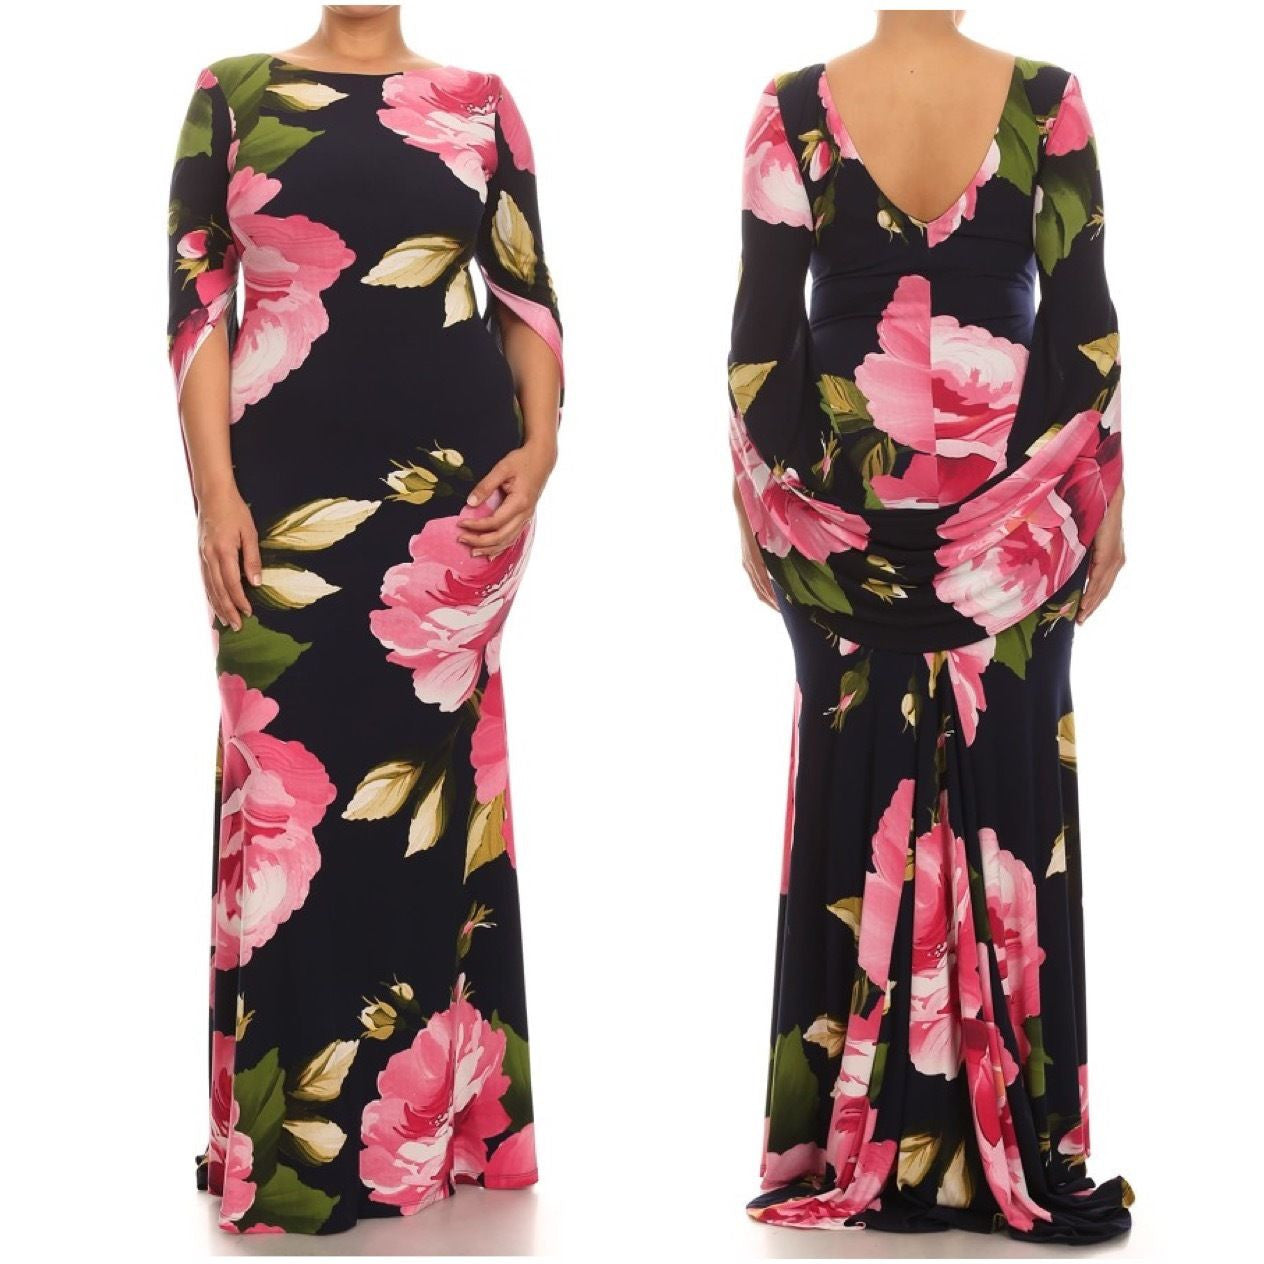 Plus Maxi Gown Dress Floral Mermaid Cocktail Formal Train Low Back